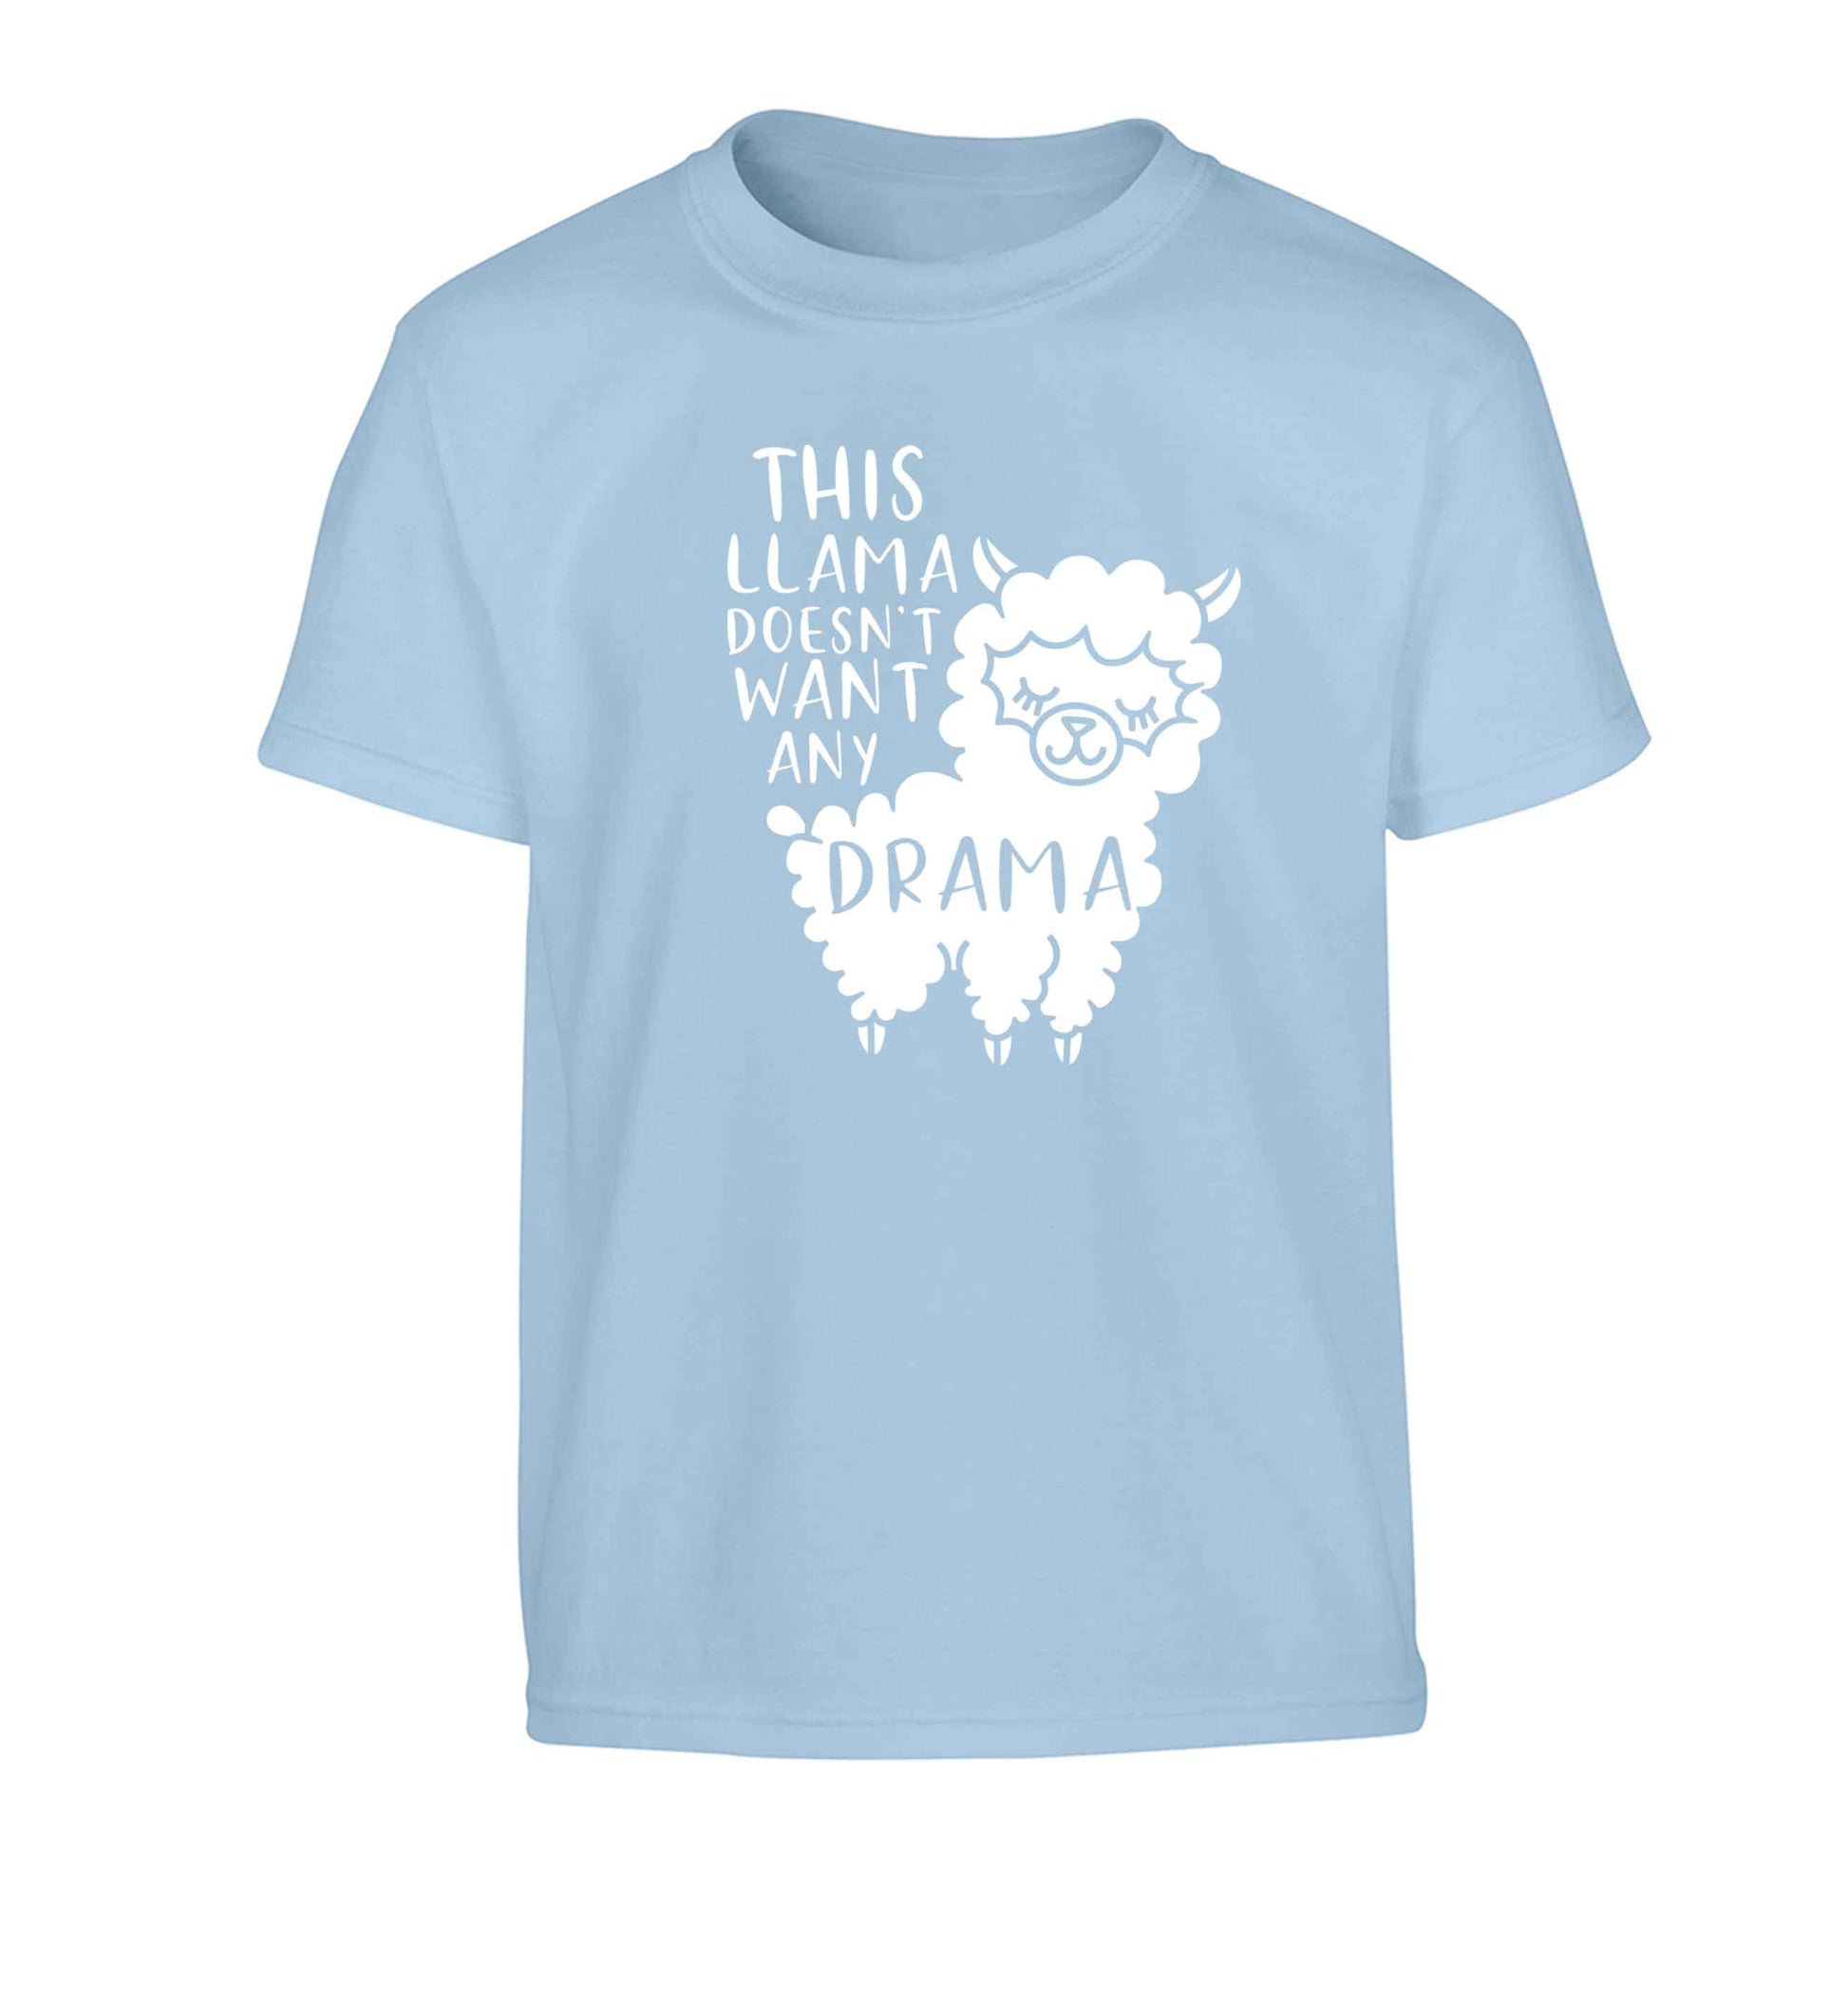 This Llama doesn't want any drama Children's light blue Tshirt 12-13 Years